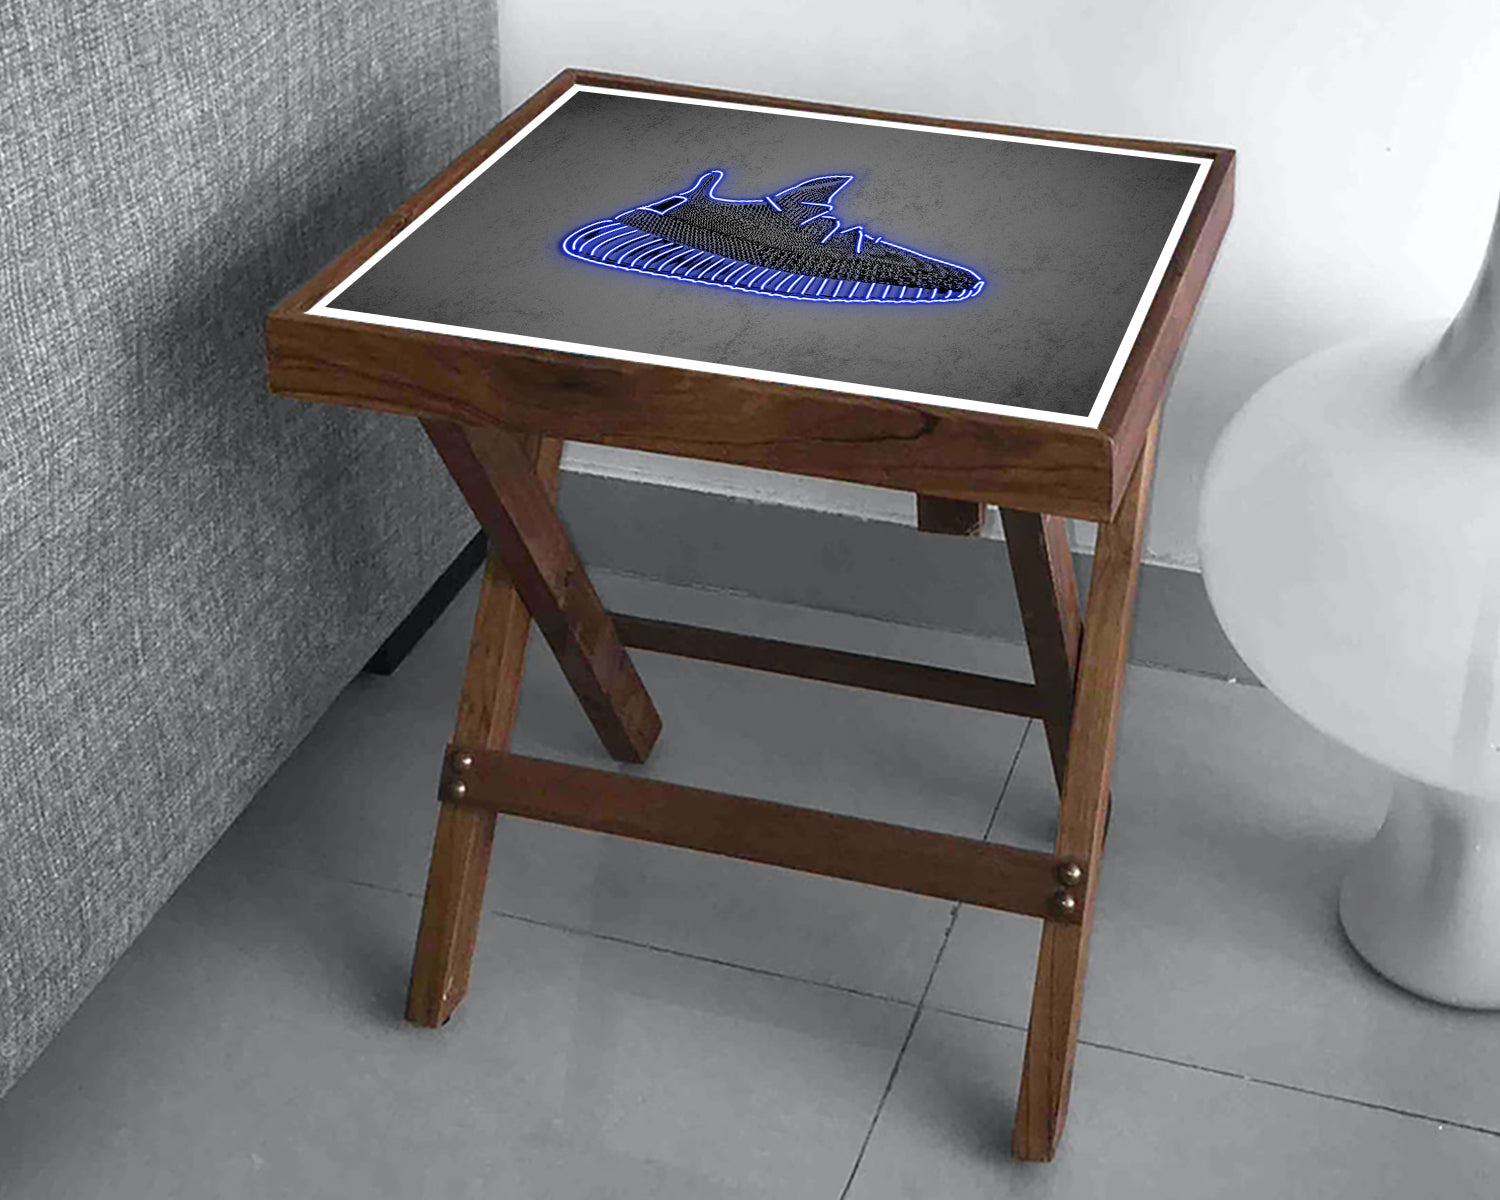 Yeezy Shoes Blue Neon Effect Coffee and Laptop Table 